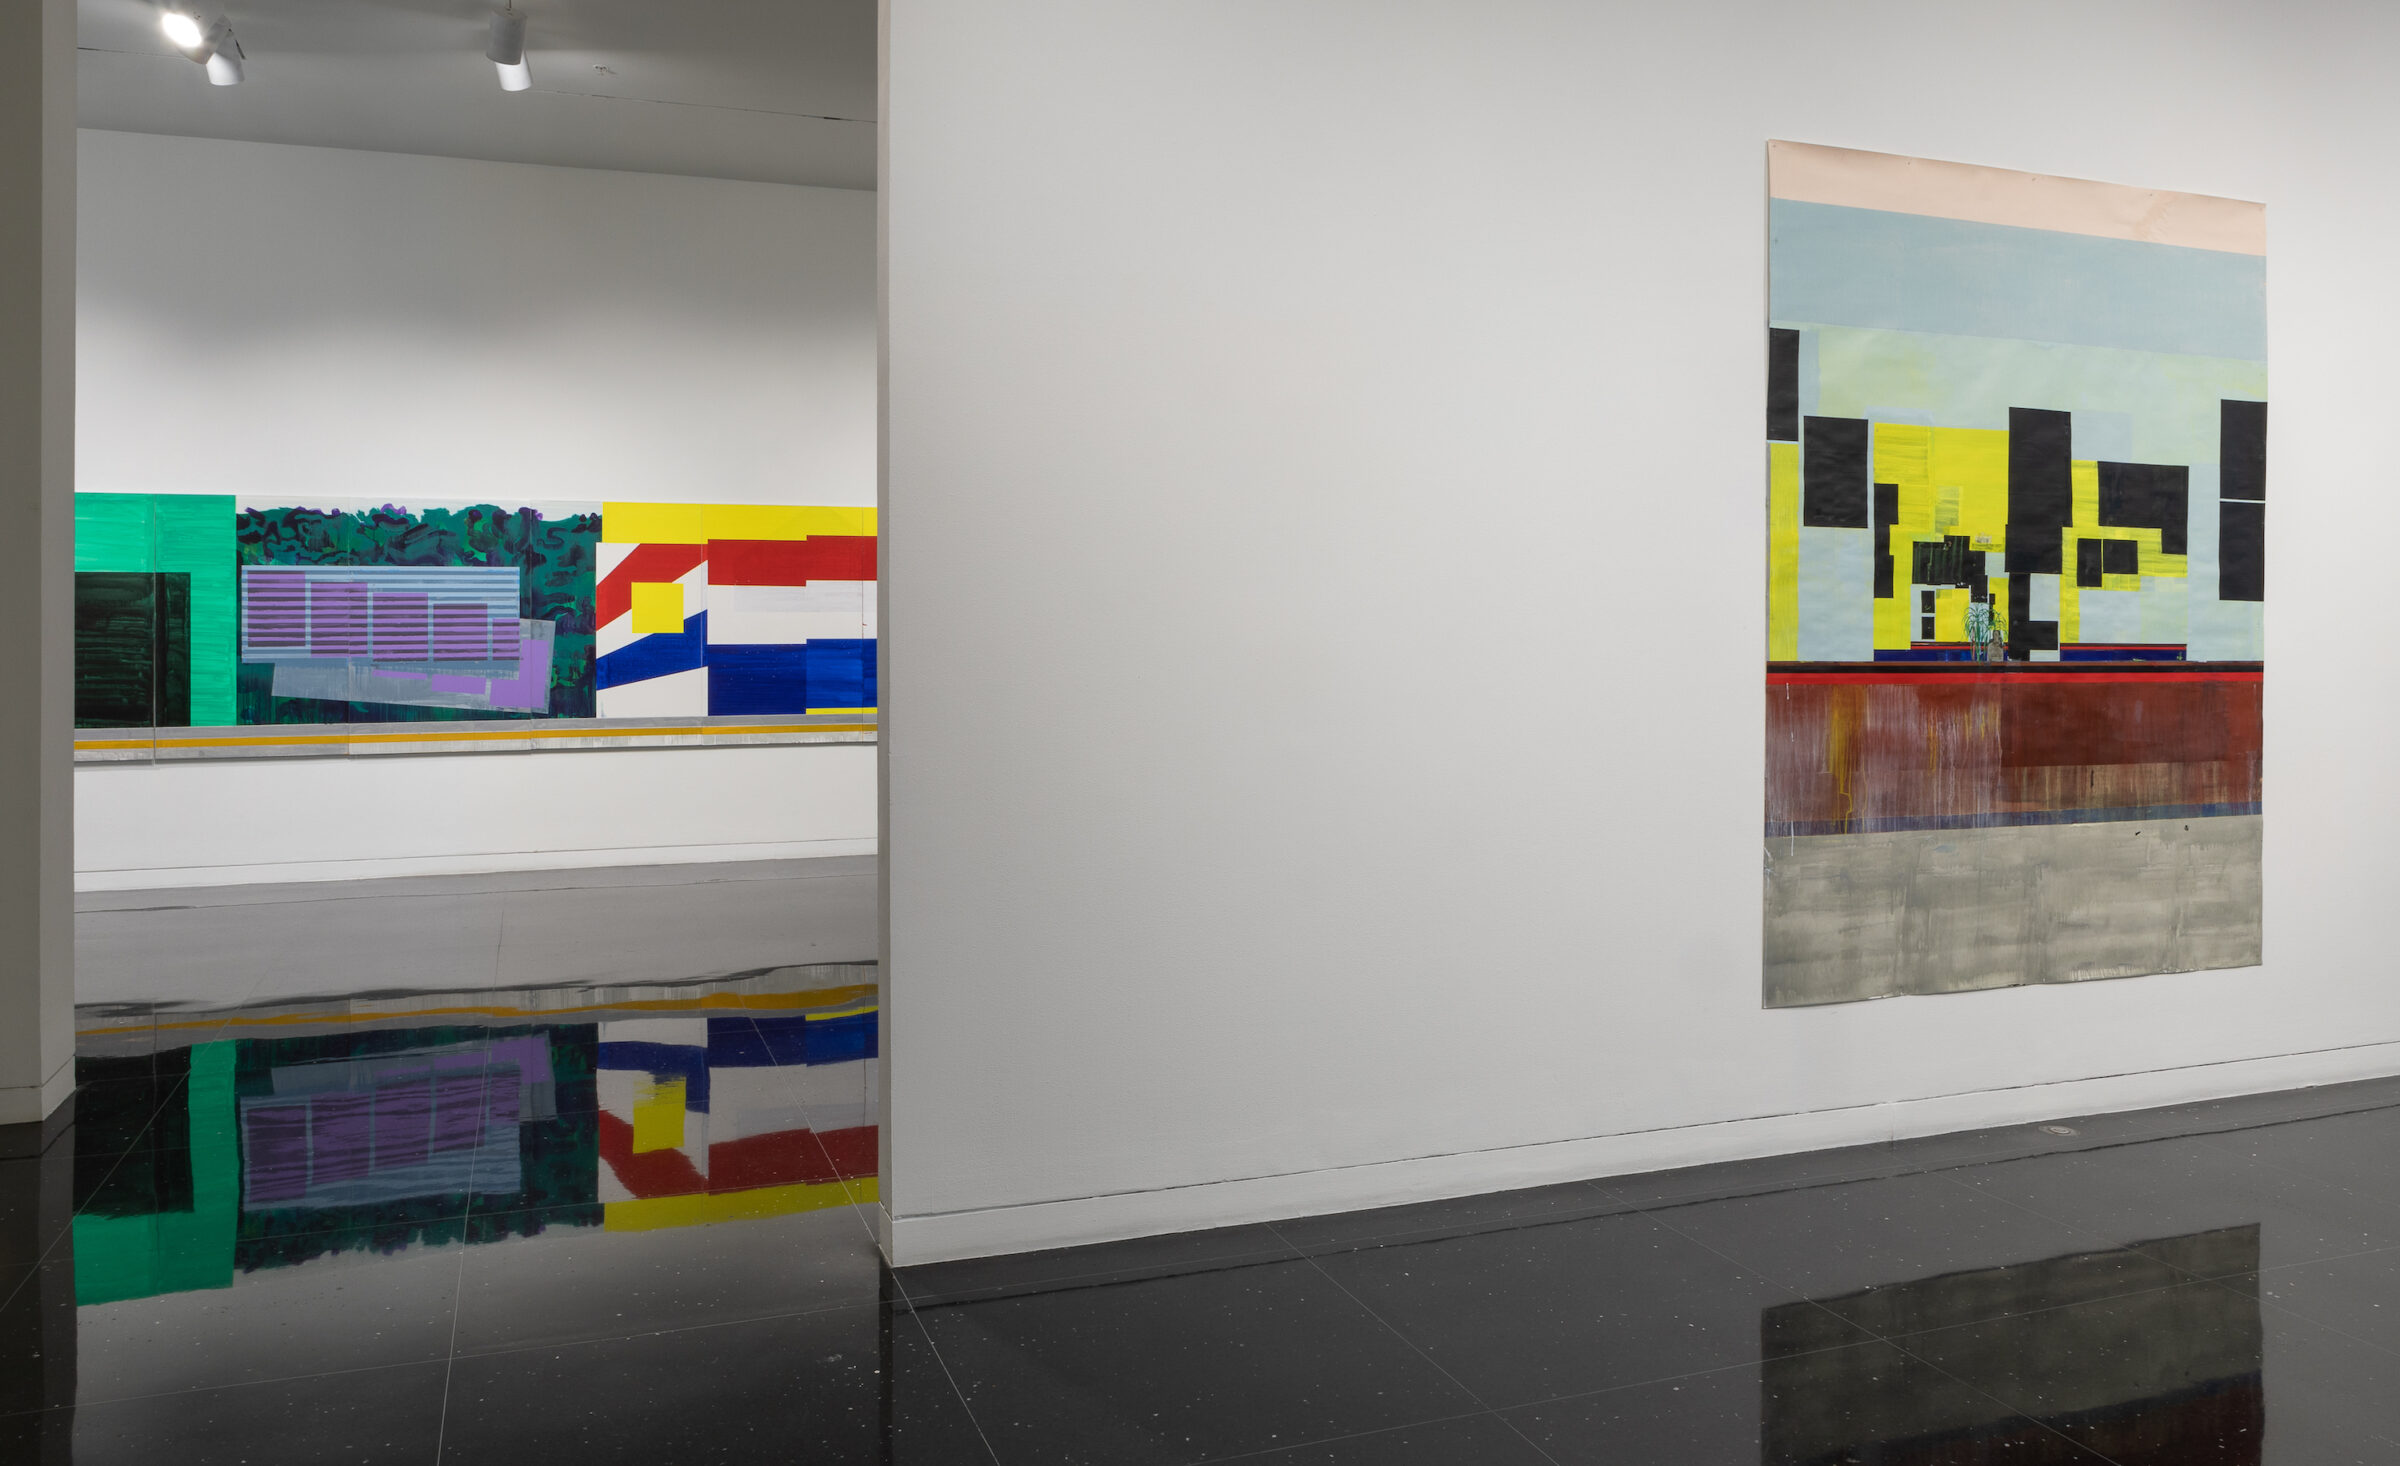 A white gallery space in which two unframed paintings hang on two separate walls. On the closer wall to the right hangs an abstract painting on paper in which the only distinguishable image is a small potted plant. On the far wall to the left is a large banner-like image of geometric patterns in primary colors.